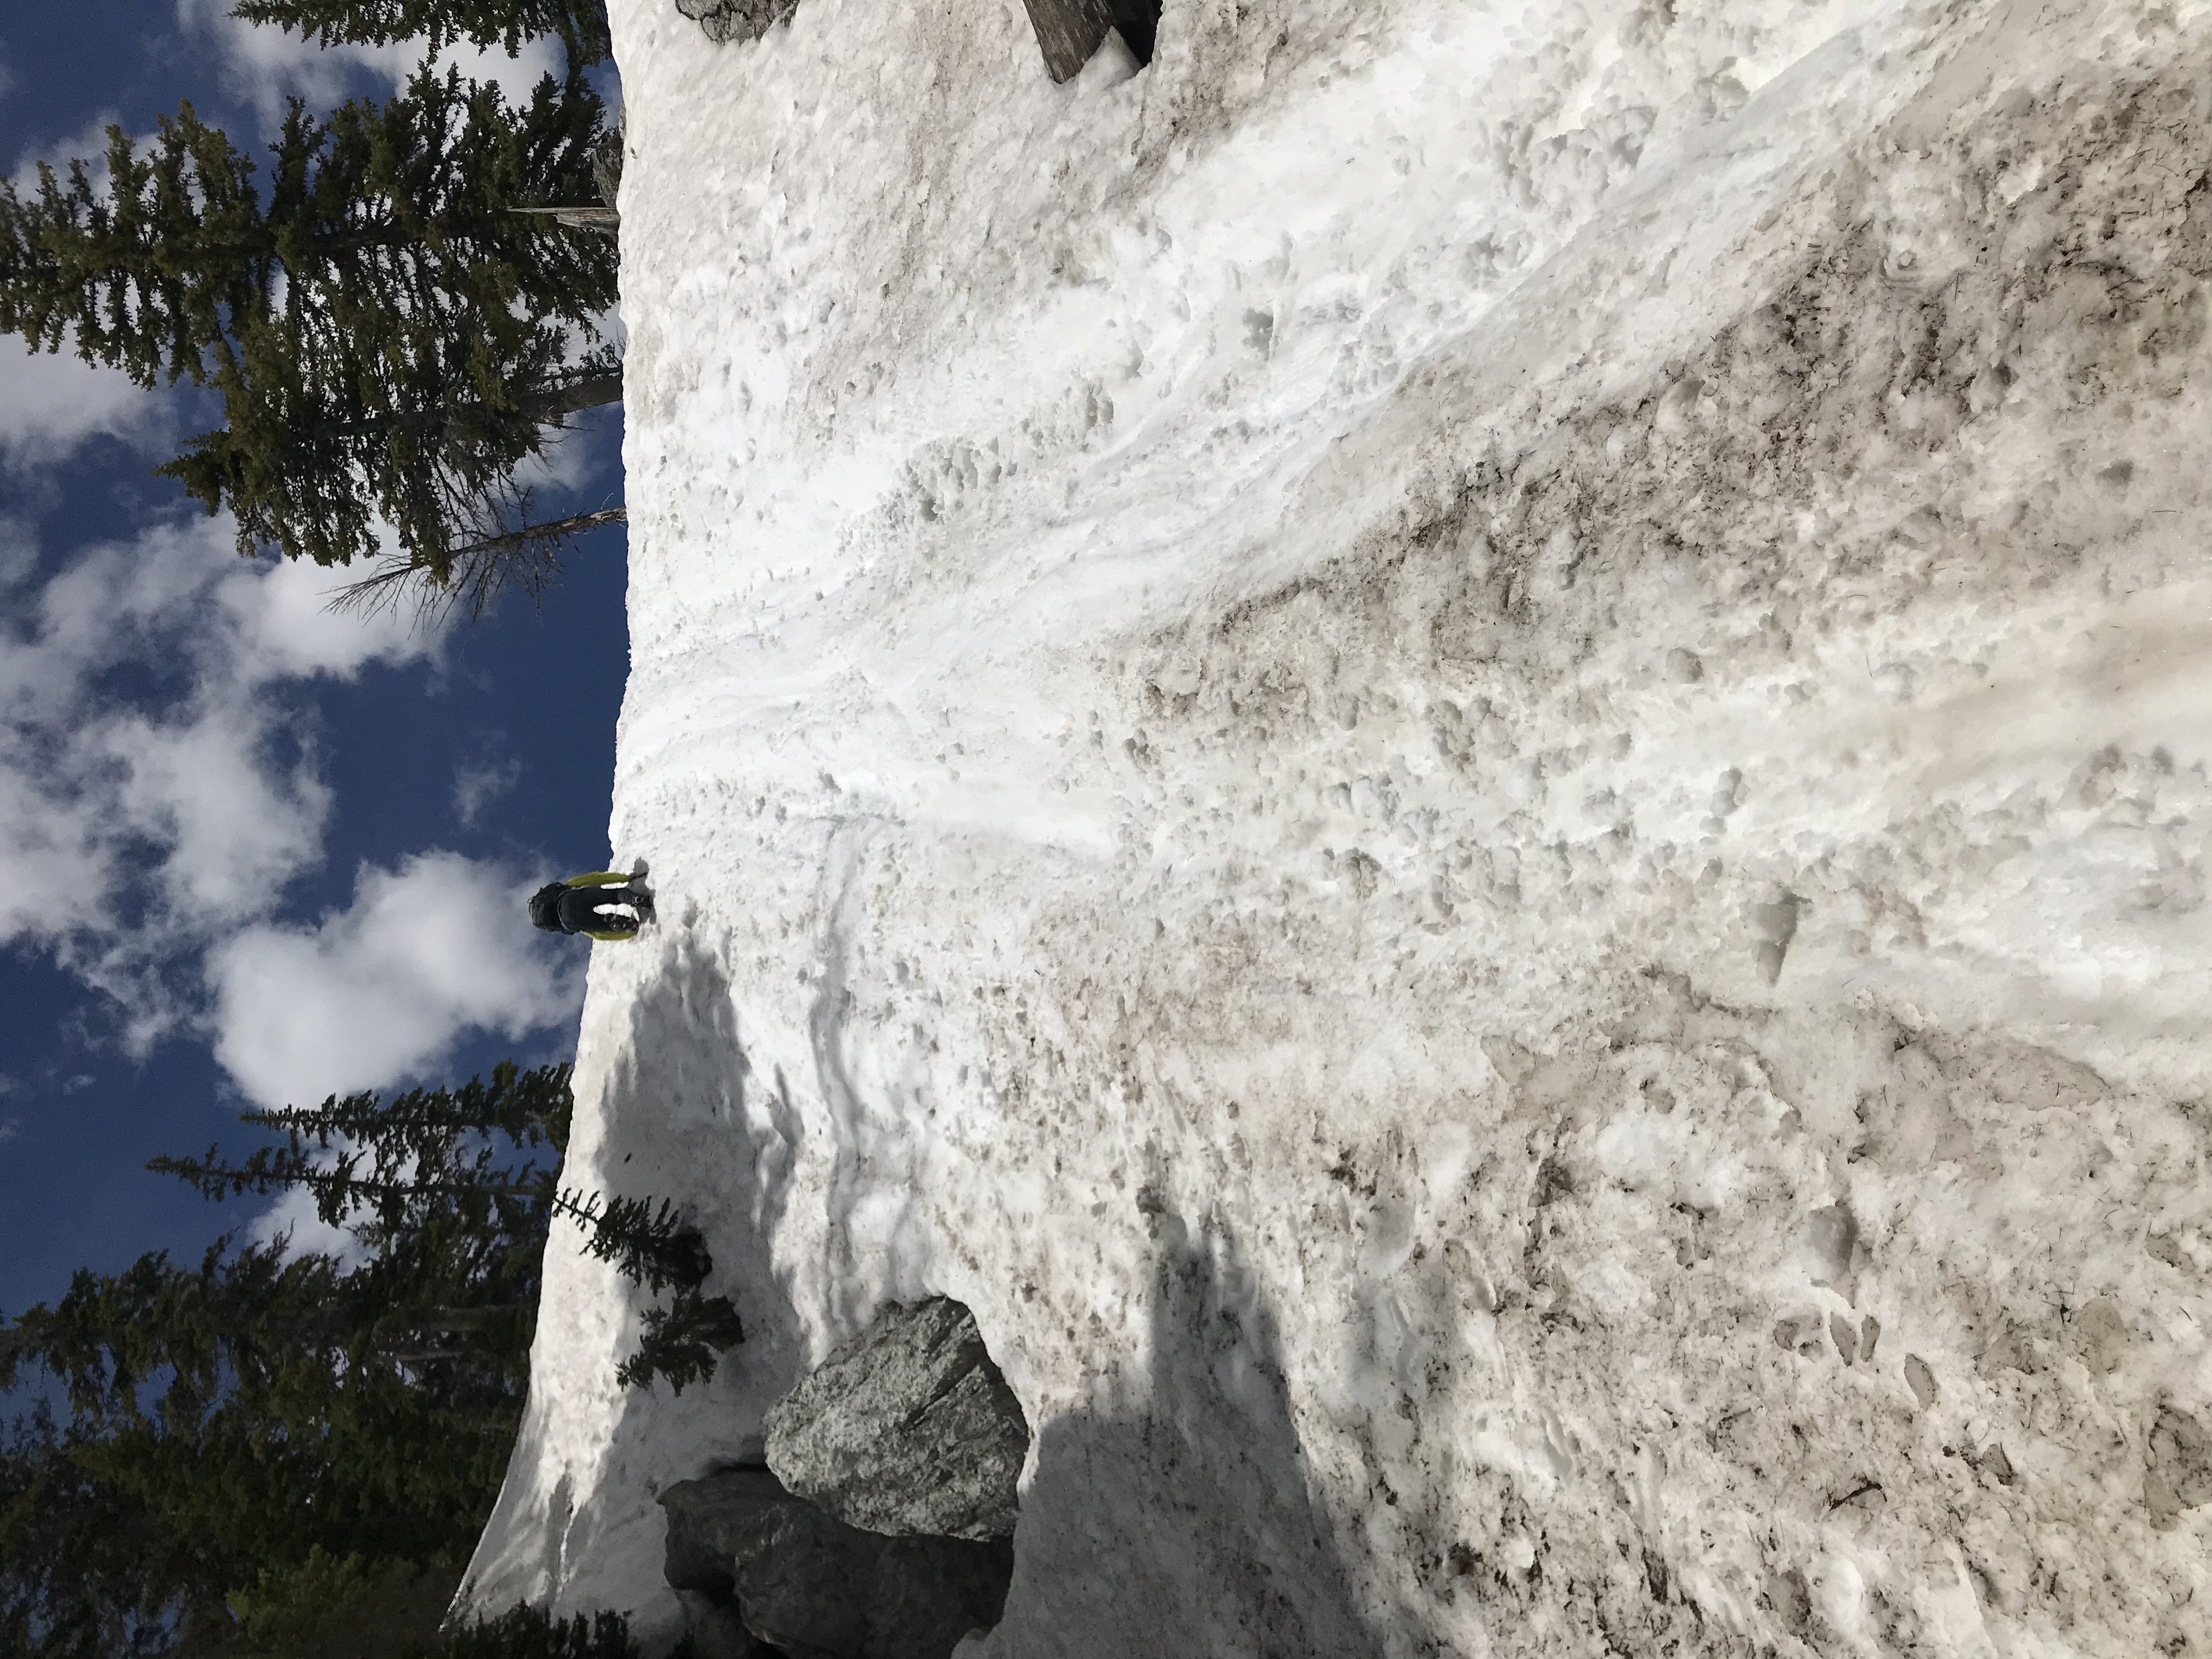 Climbing wall of snow to get to Delta Lake